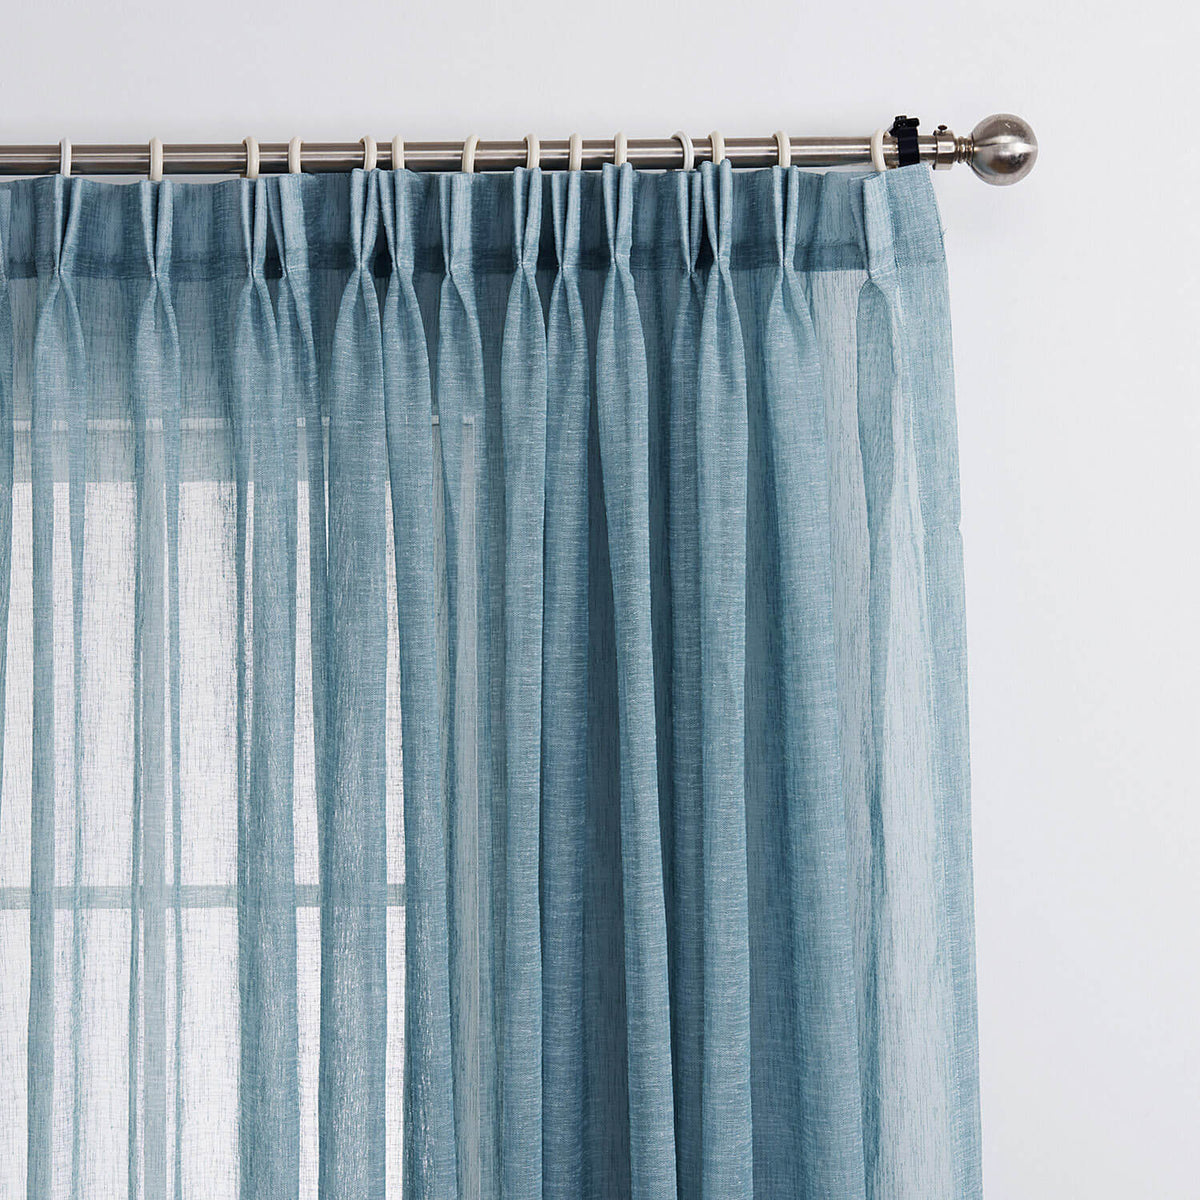 Blue Linen Sheer Curtains for Living Room 2 Panels – Anady Top